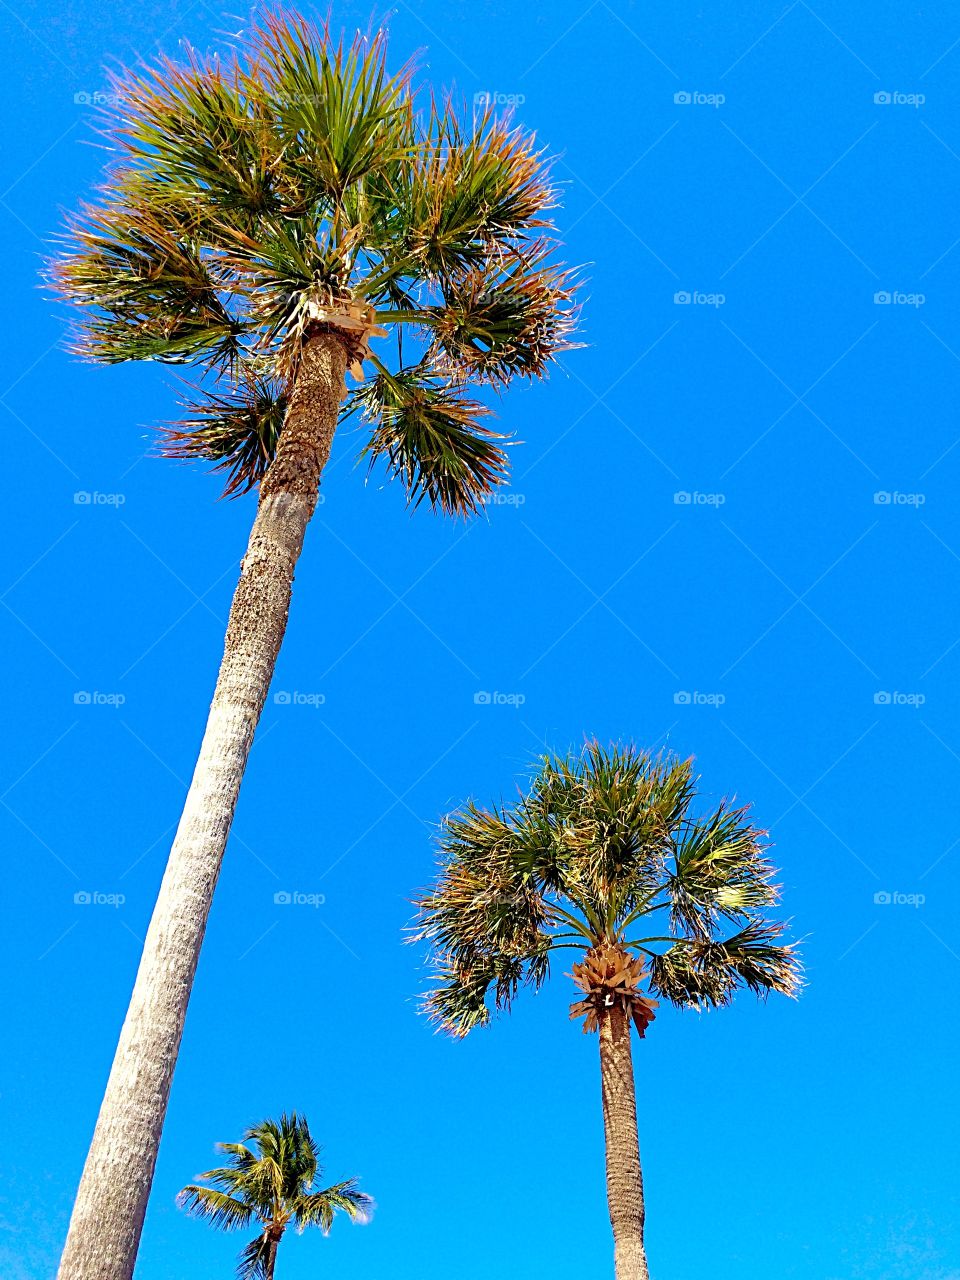 Stand Tall. Palm trees on a windy day in Ft Lauderdale